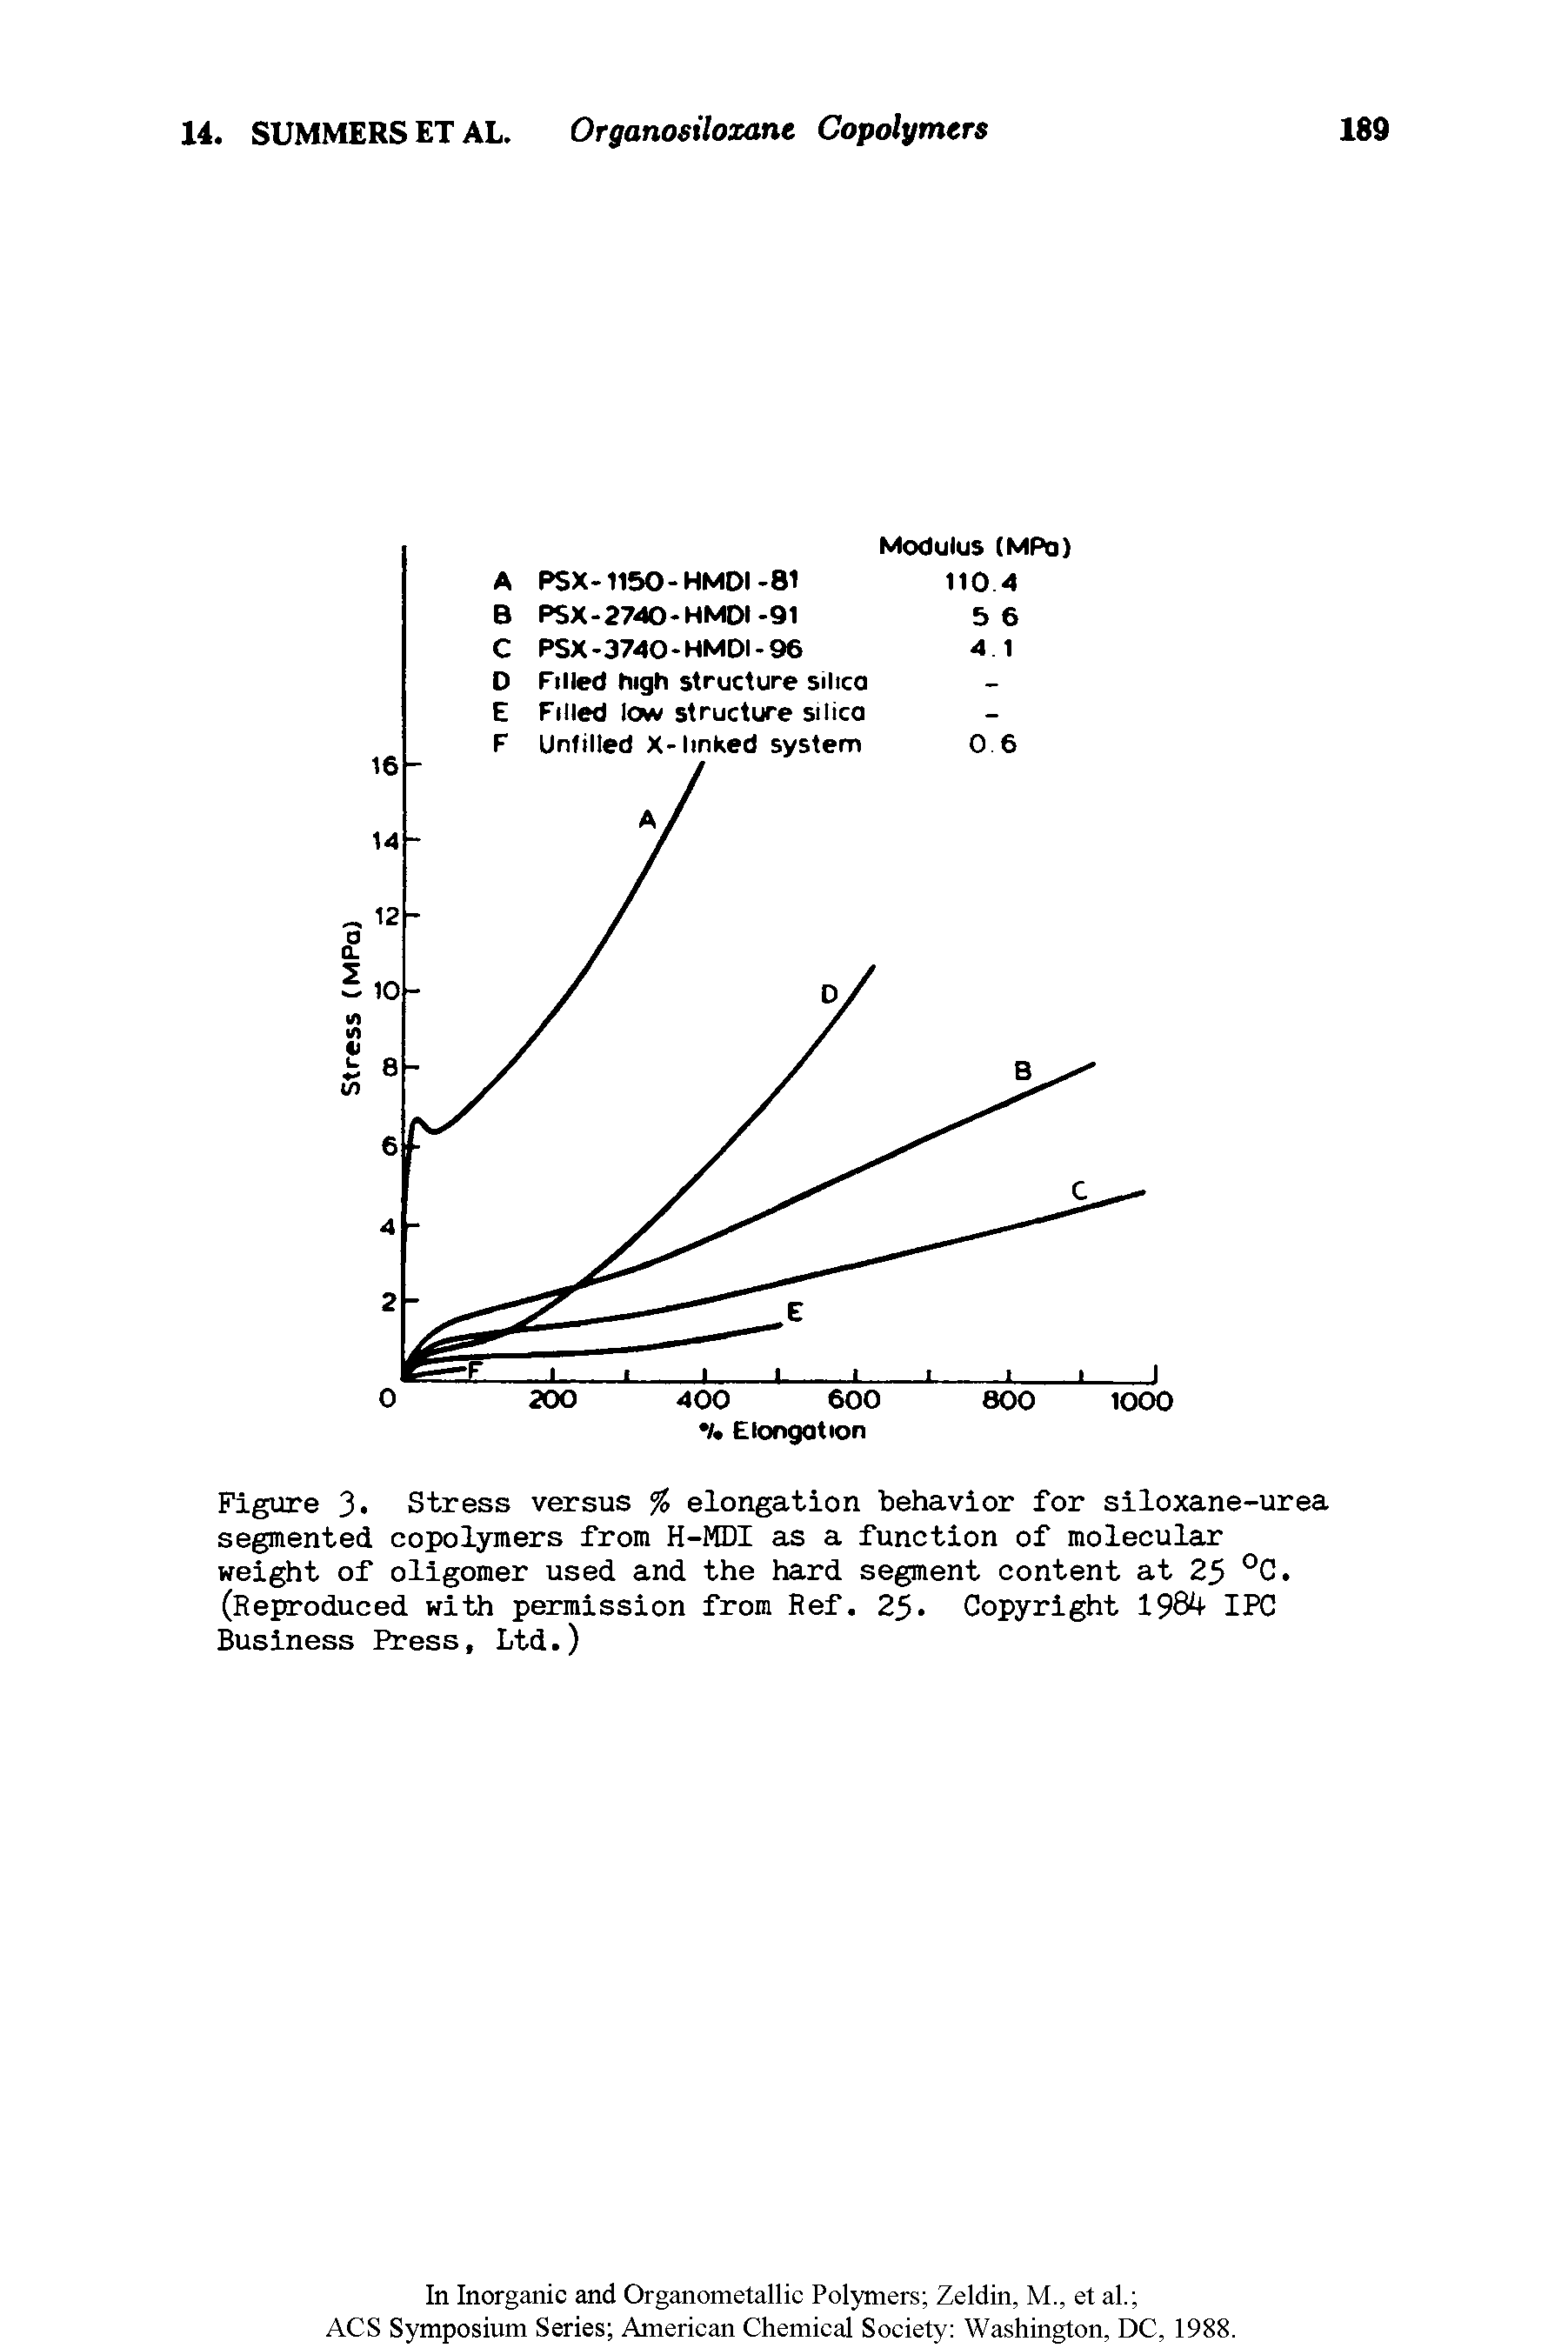 Figure 3. Stress versus % elongation behavior for siloxane-urea segmented copolymers from H-MDI as a function of molecular weight of oligomer used and the hard segment content at 25 °C. (Reproduced with permission from Ref. 25. Copyright 1984 IPC Business Press, Ltd.)...